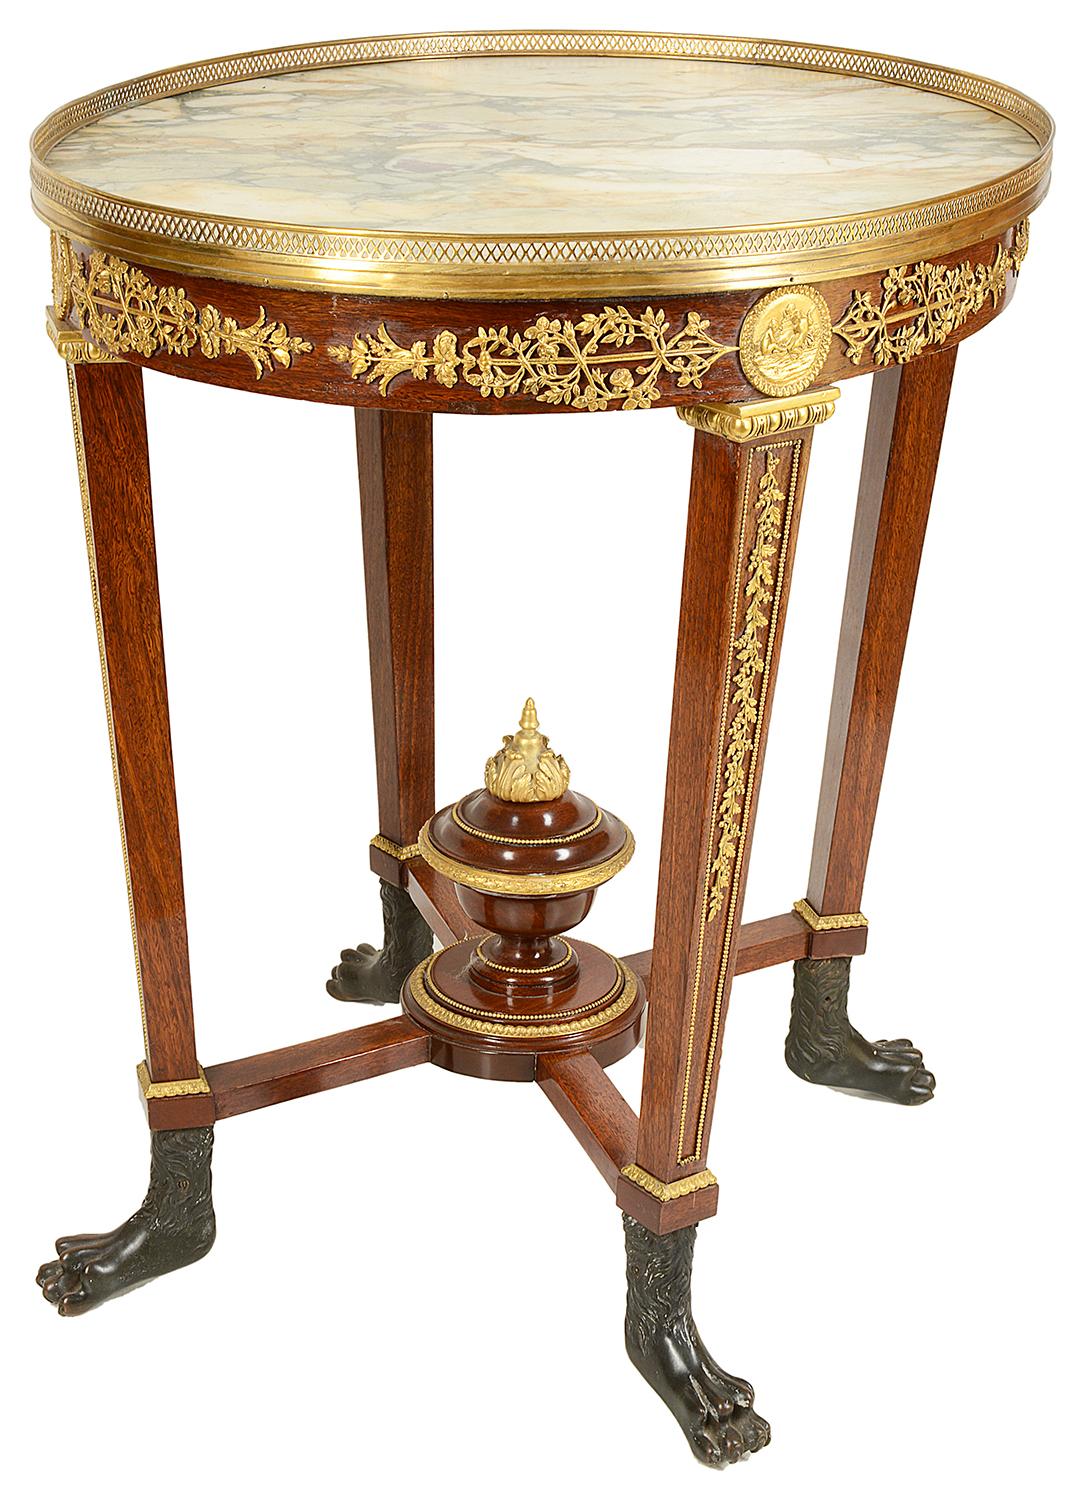 Marble Empire Influenced Centre Table, 19th Century For Sale